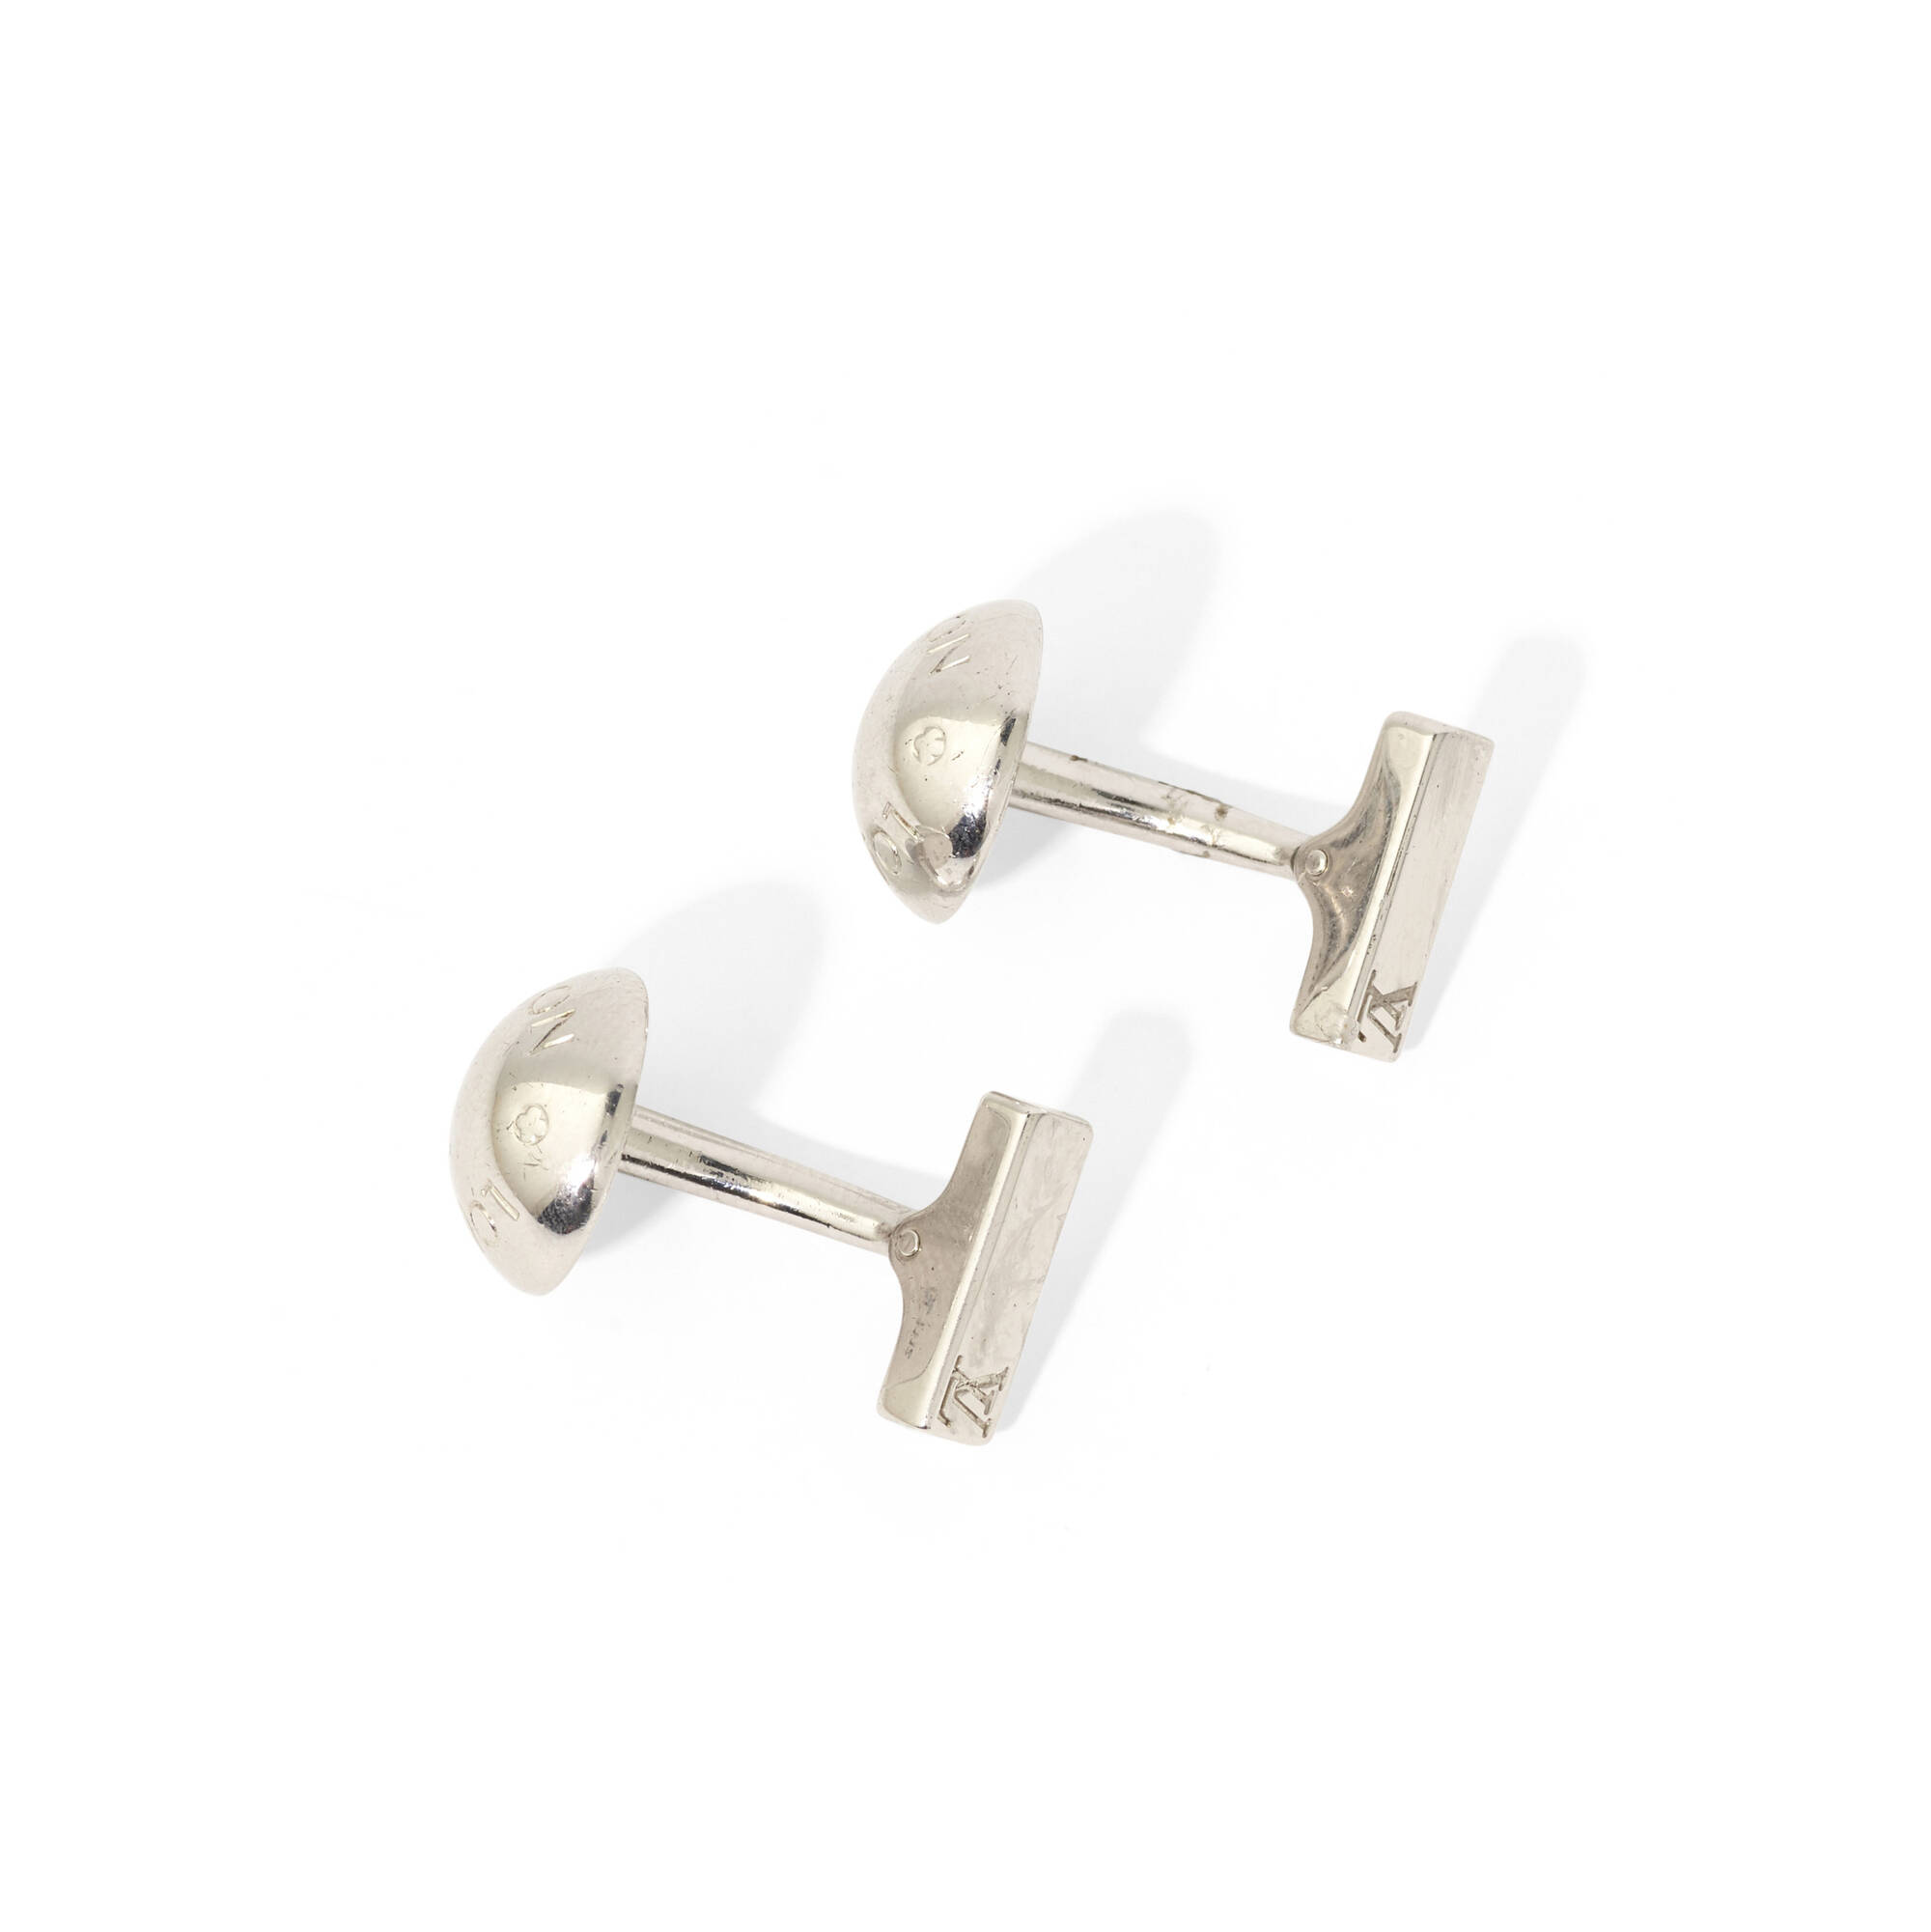 511: LOUIS VUITTON, Sterling silver cufflinks < Luxury, 14 July 2021 <  Auctions